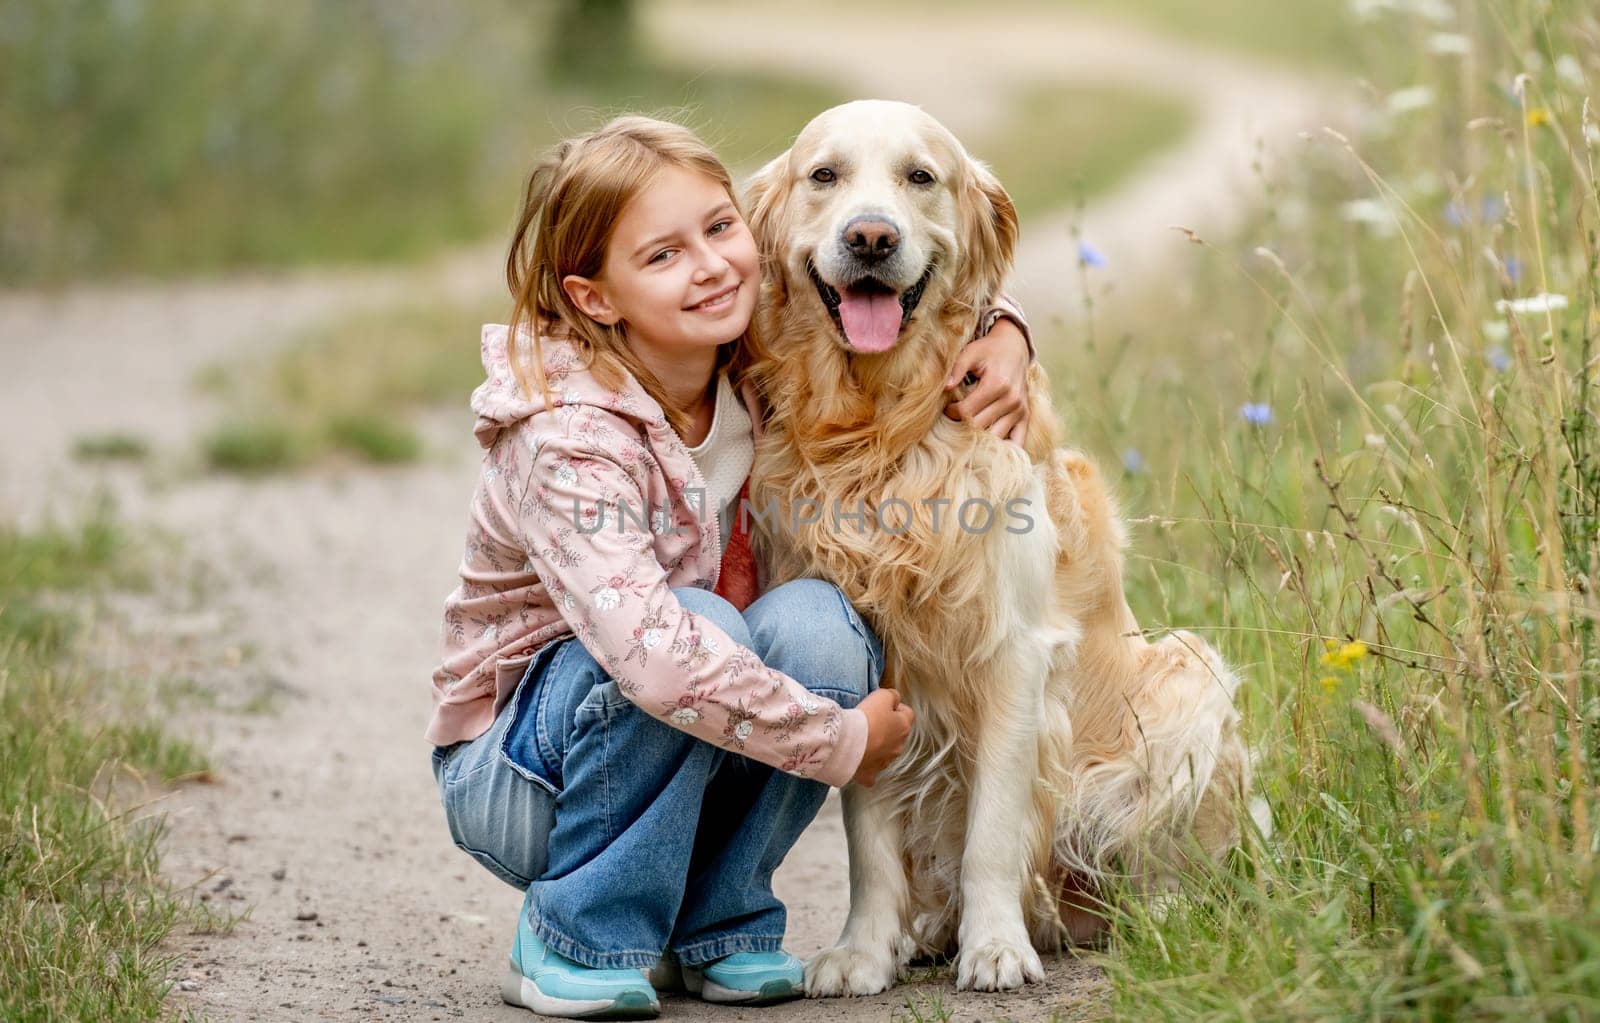 Preteen girl with golden retriever dog sitting at nature and looking back. Cute child kid hugging purebred pet doggy in park at summer